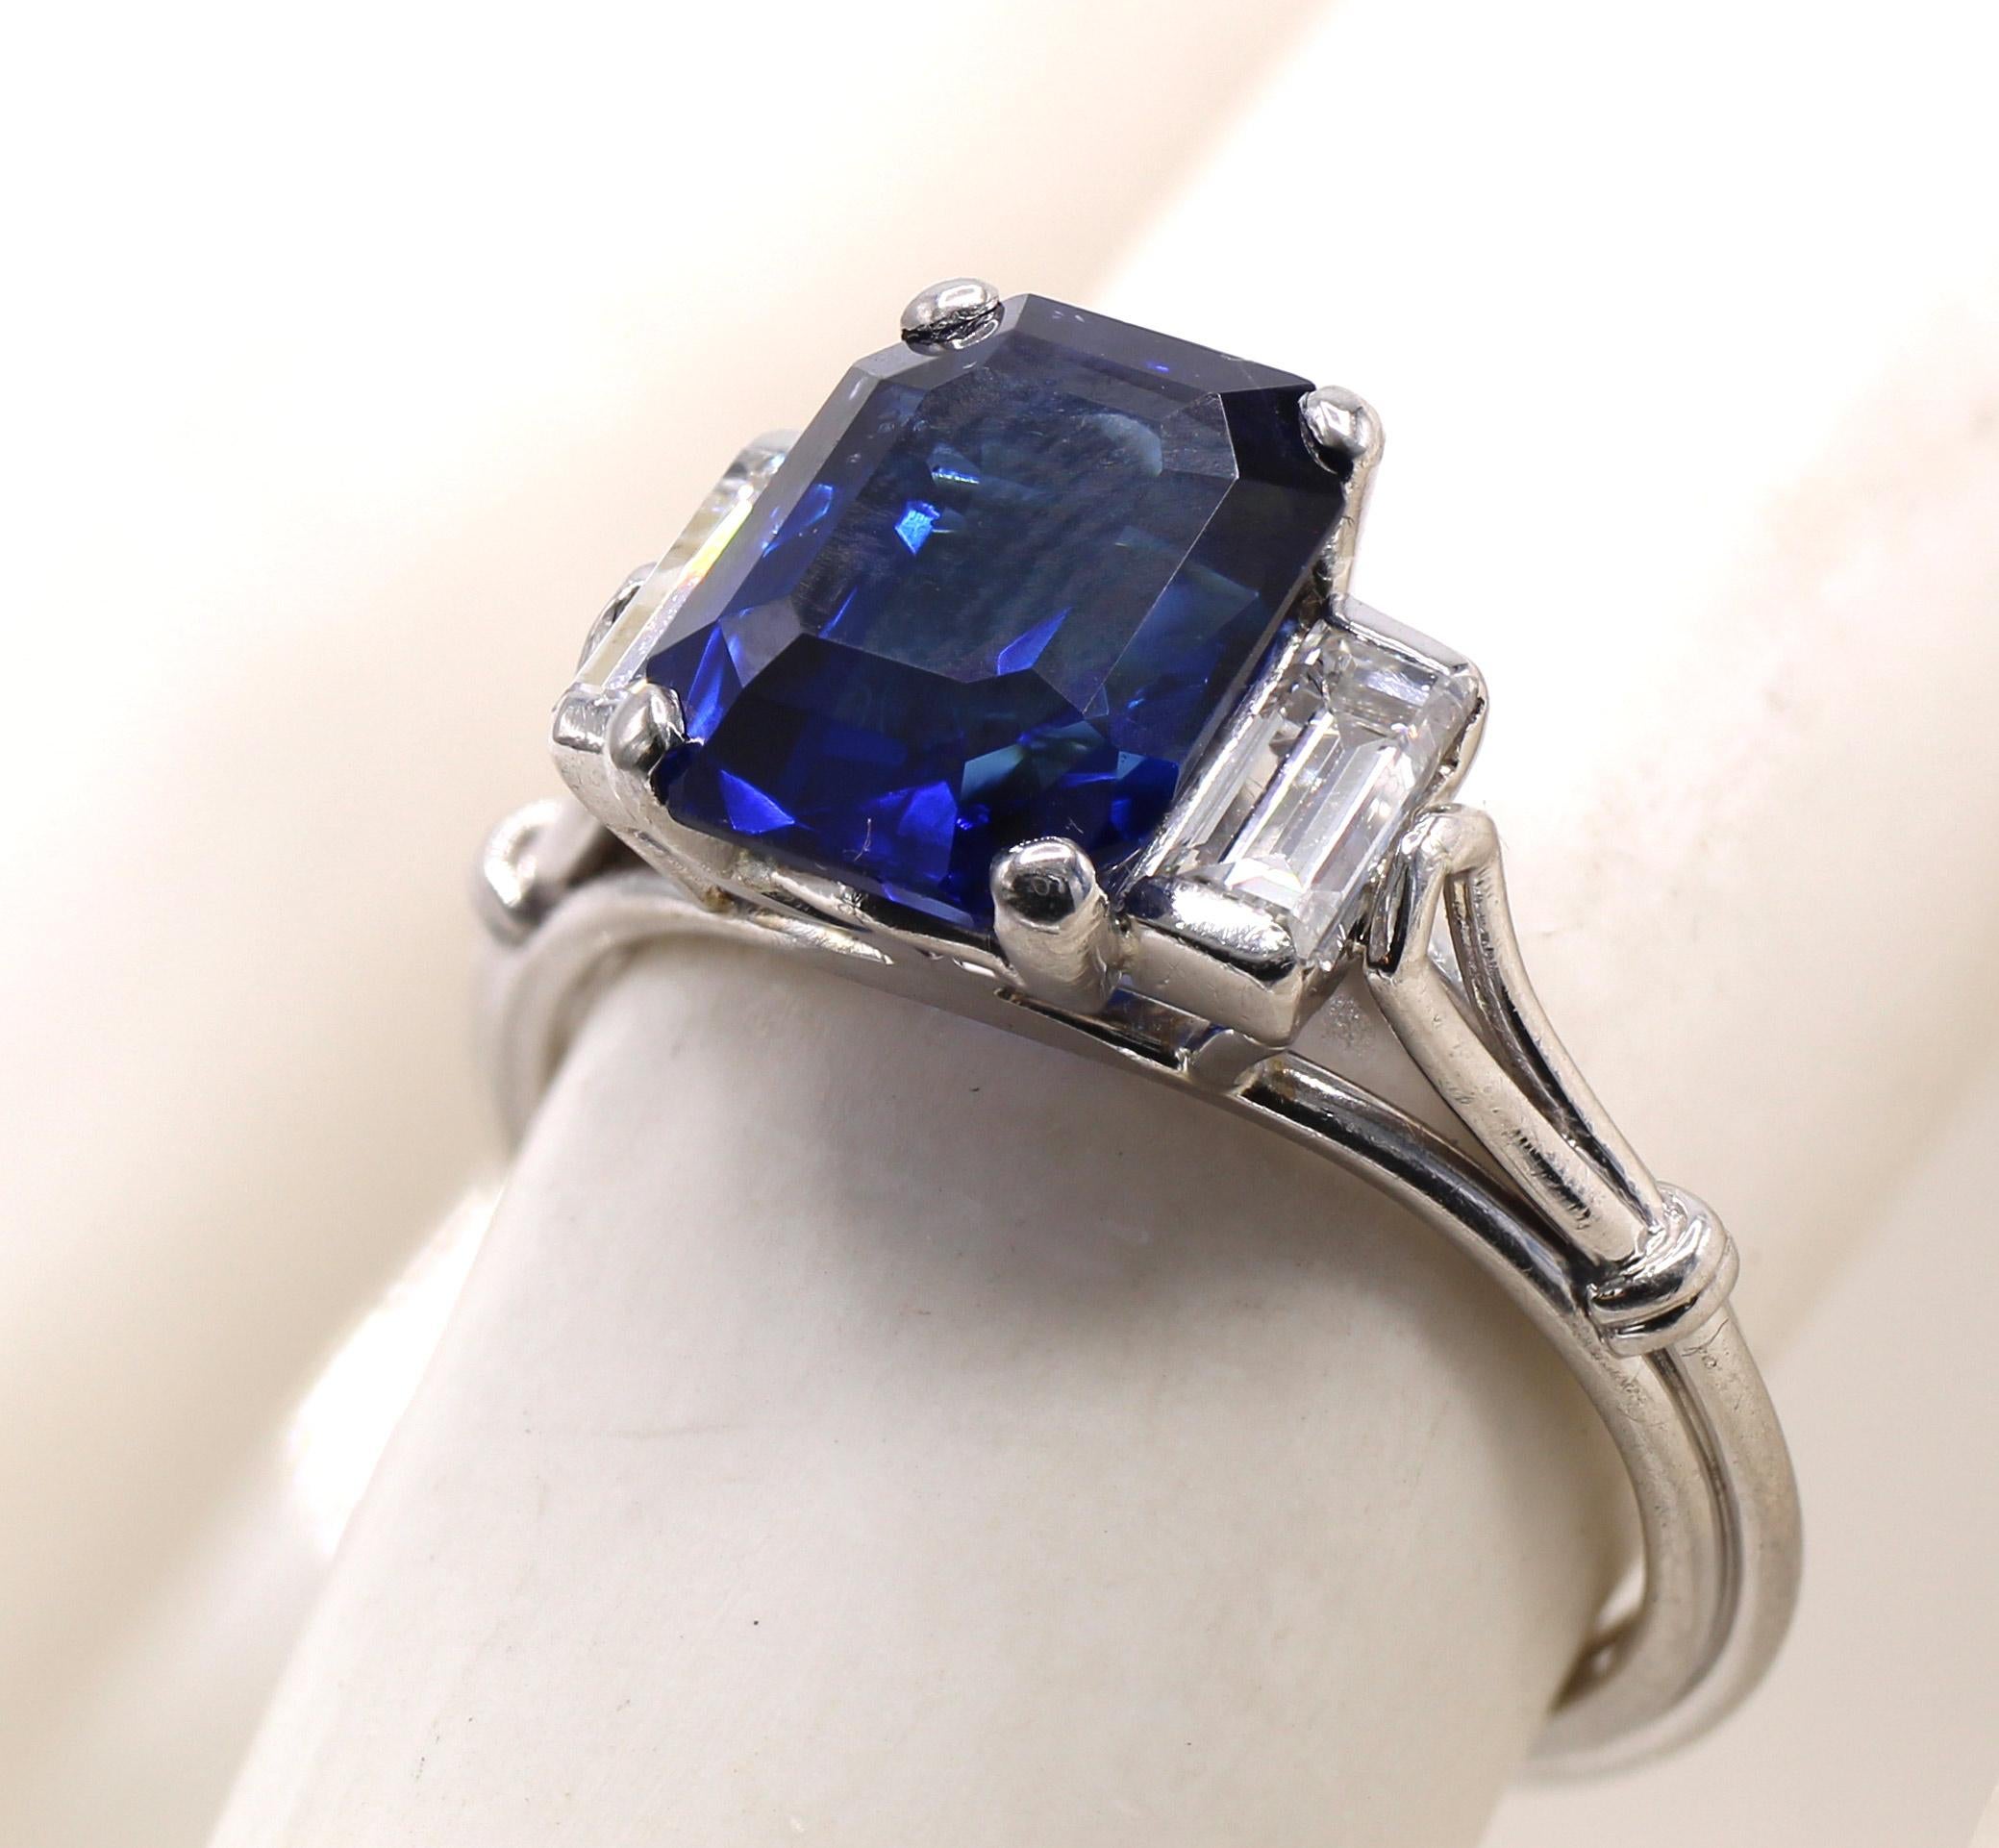 Art Deco Burma sapphire diamond ring by Henry Birks & Sons ca 1930. The center piece of this masterfully hand crafted ring is a perfectly cut rectangular step cut Burma sapphire weighing 3.20 carats accompanied by a certificate from AGL - American